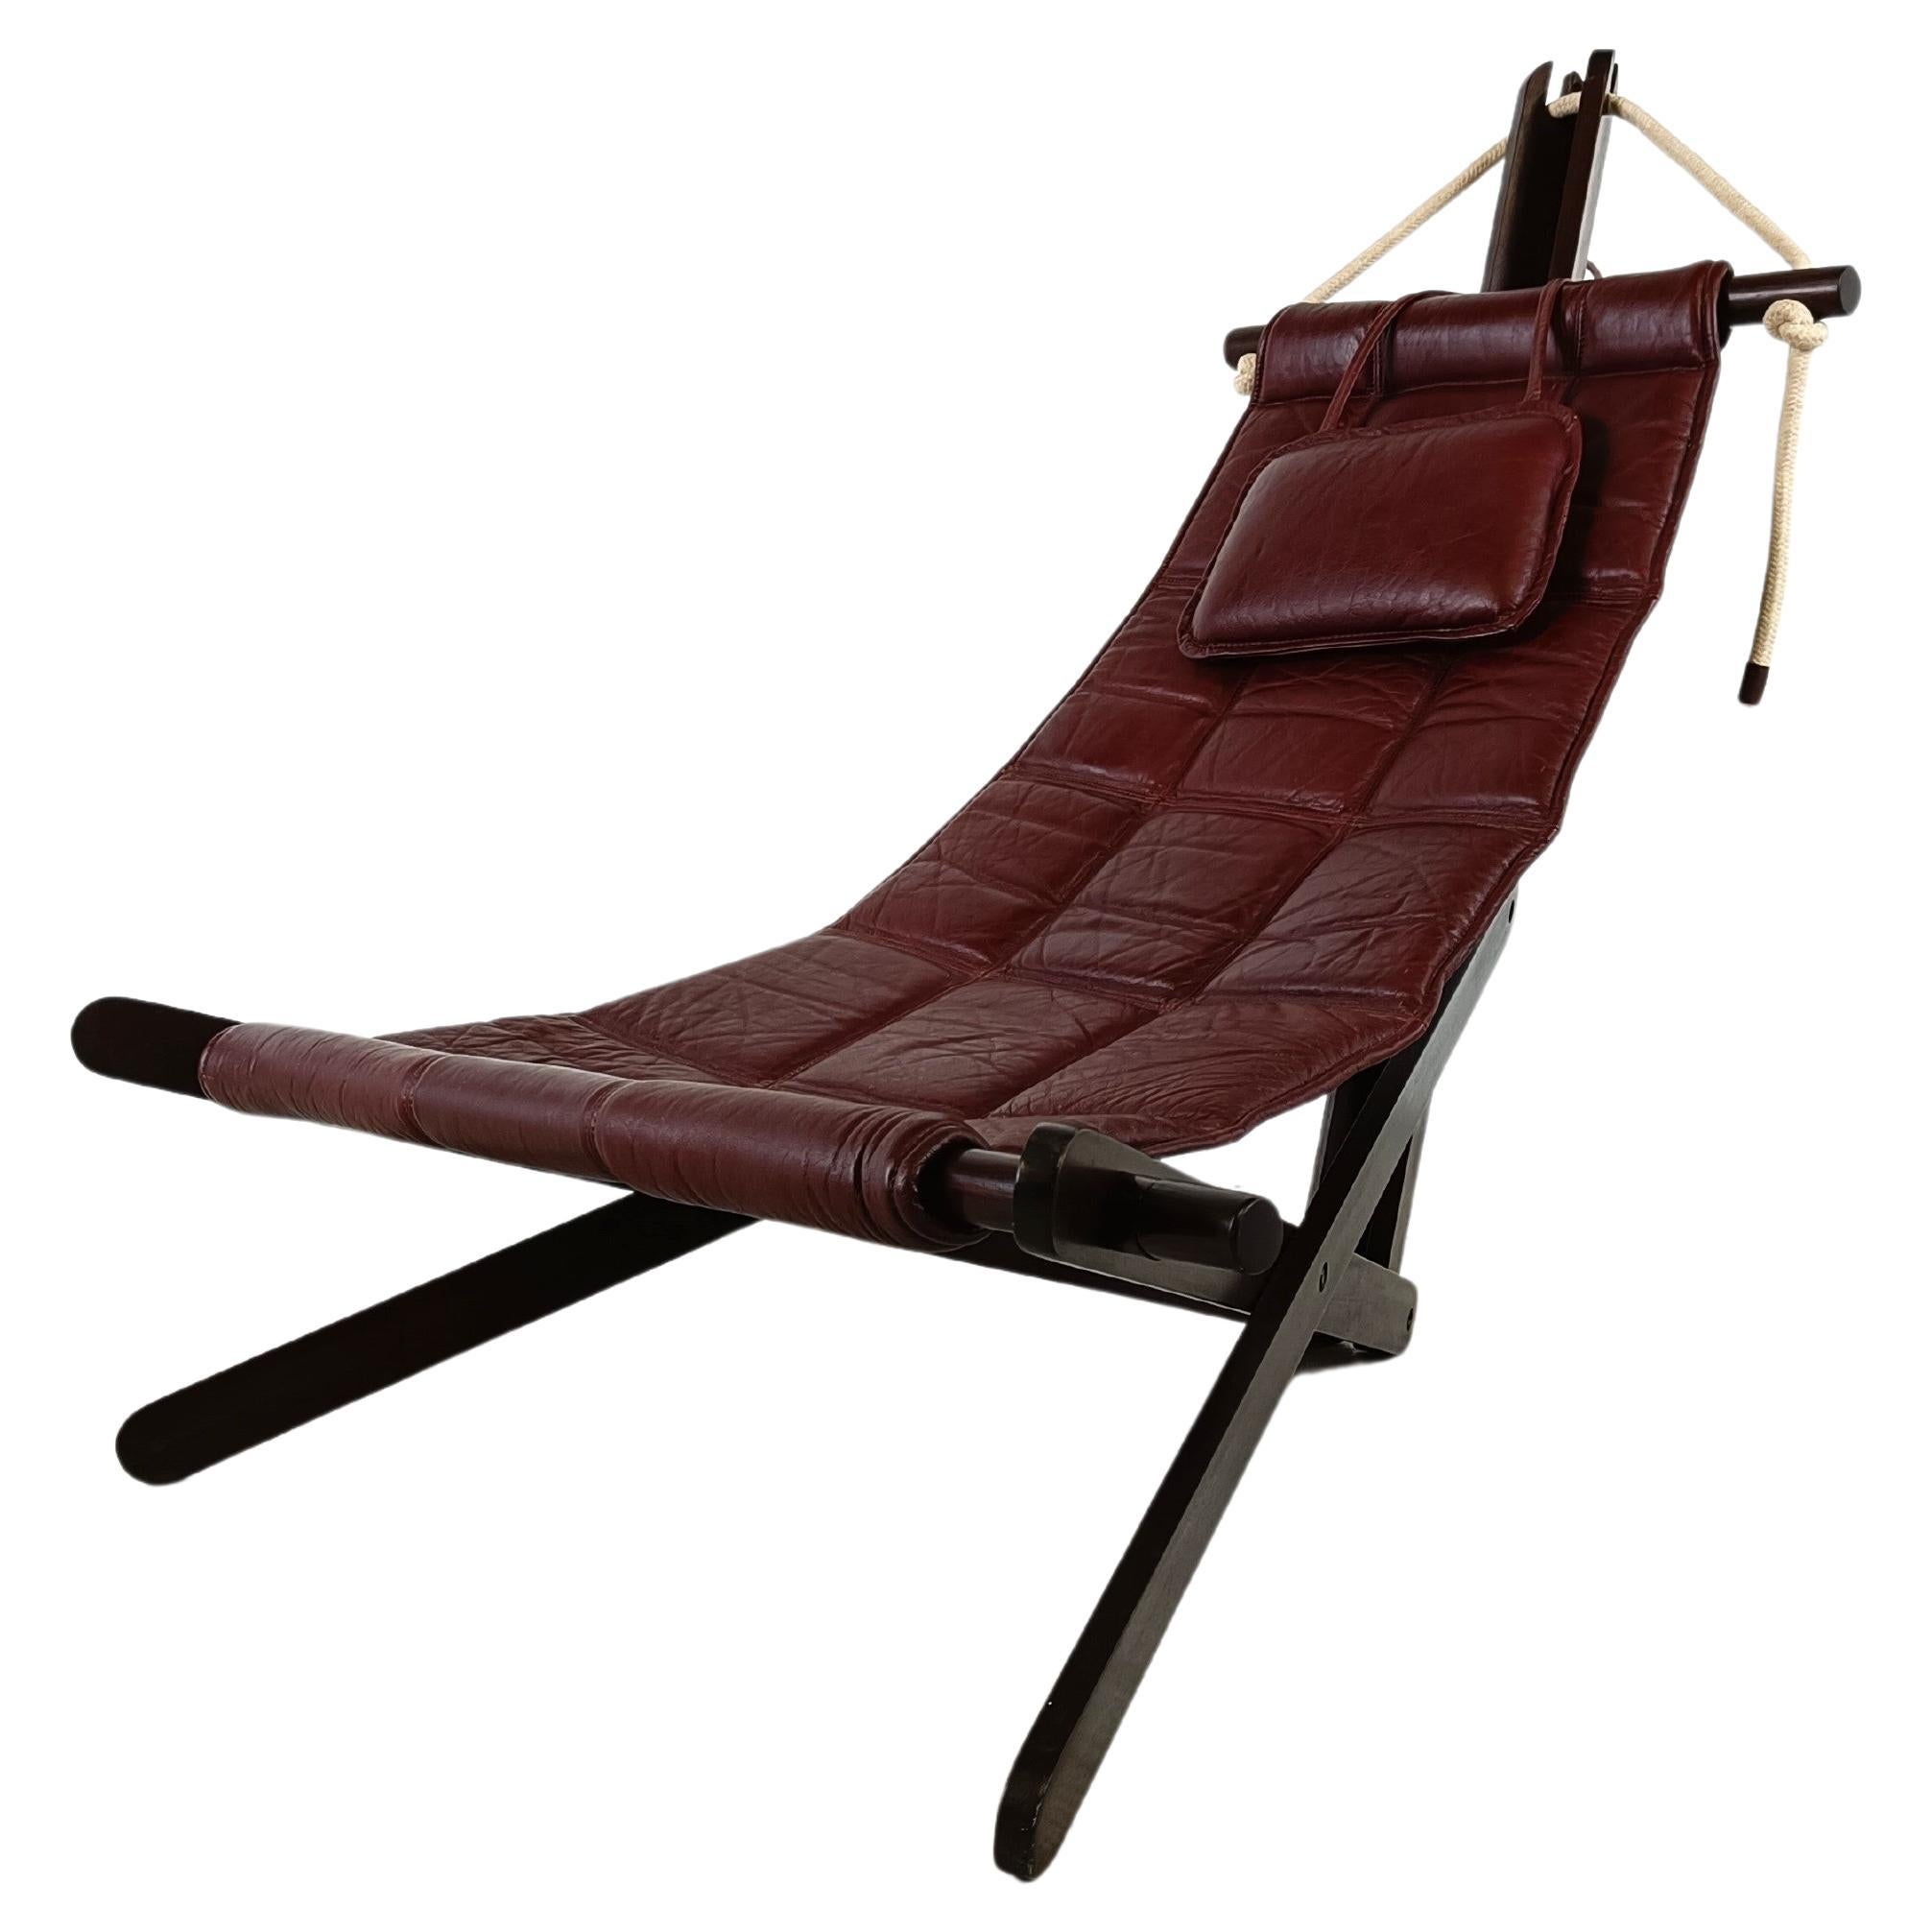 Sculptural Lounge Sling, Dominic Michaelis "Sail Chair" for Moveis Corazza 